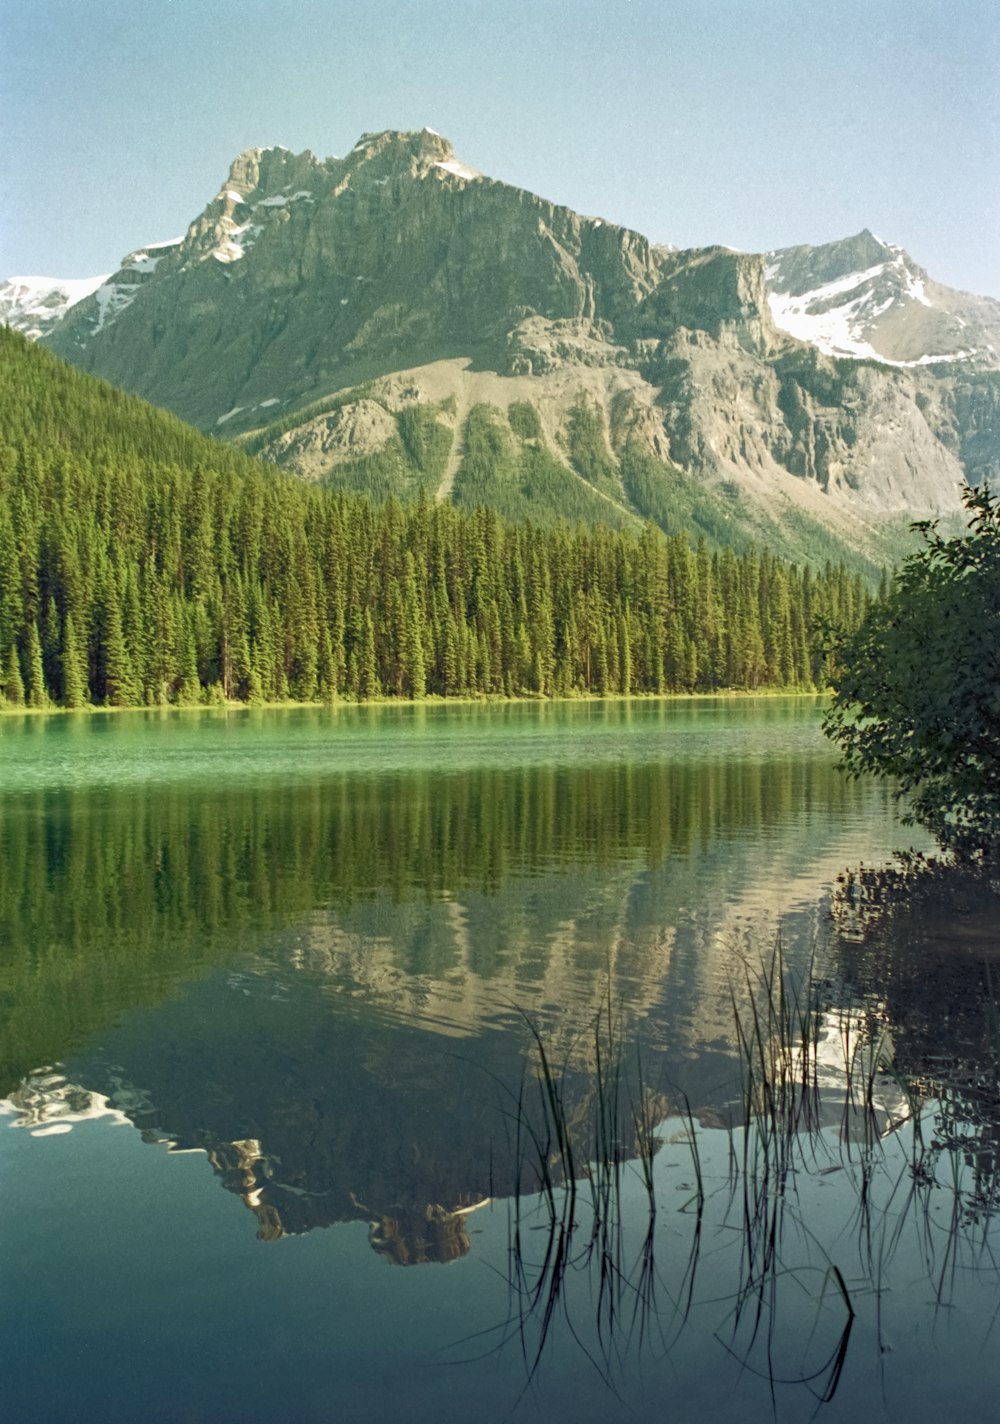 a lake surrounded by a forest with a mountain in the background